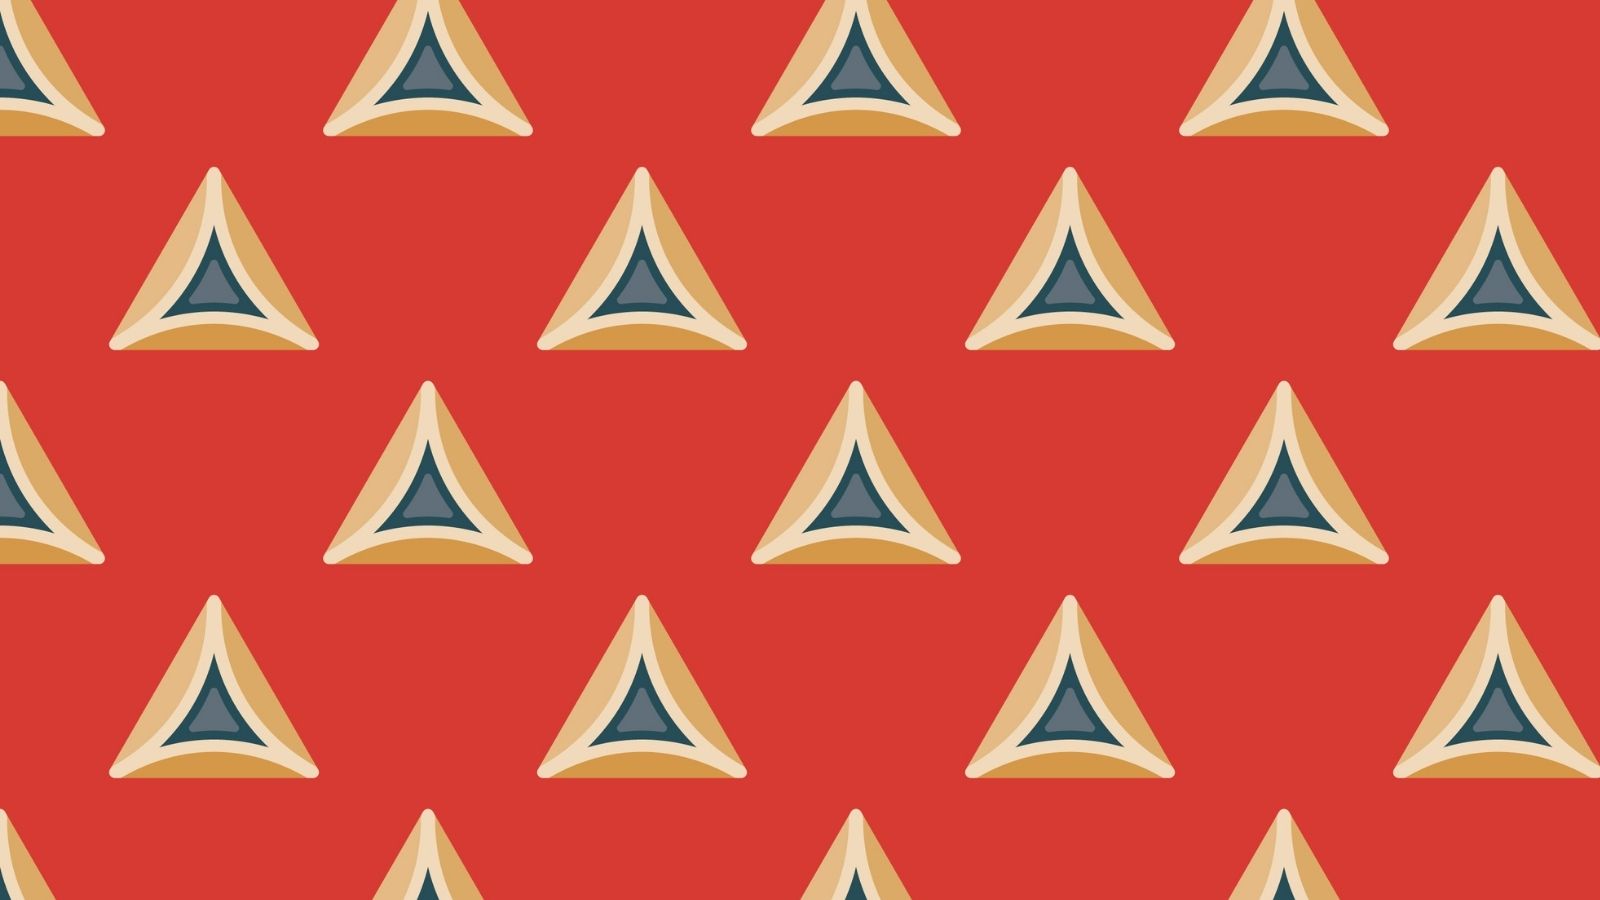 traditional hamantaschen on red background for the Jewish holiday of Purim